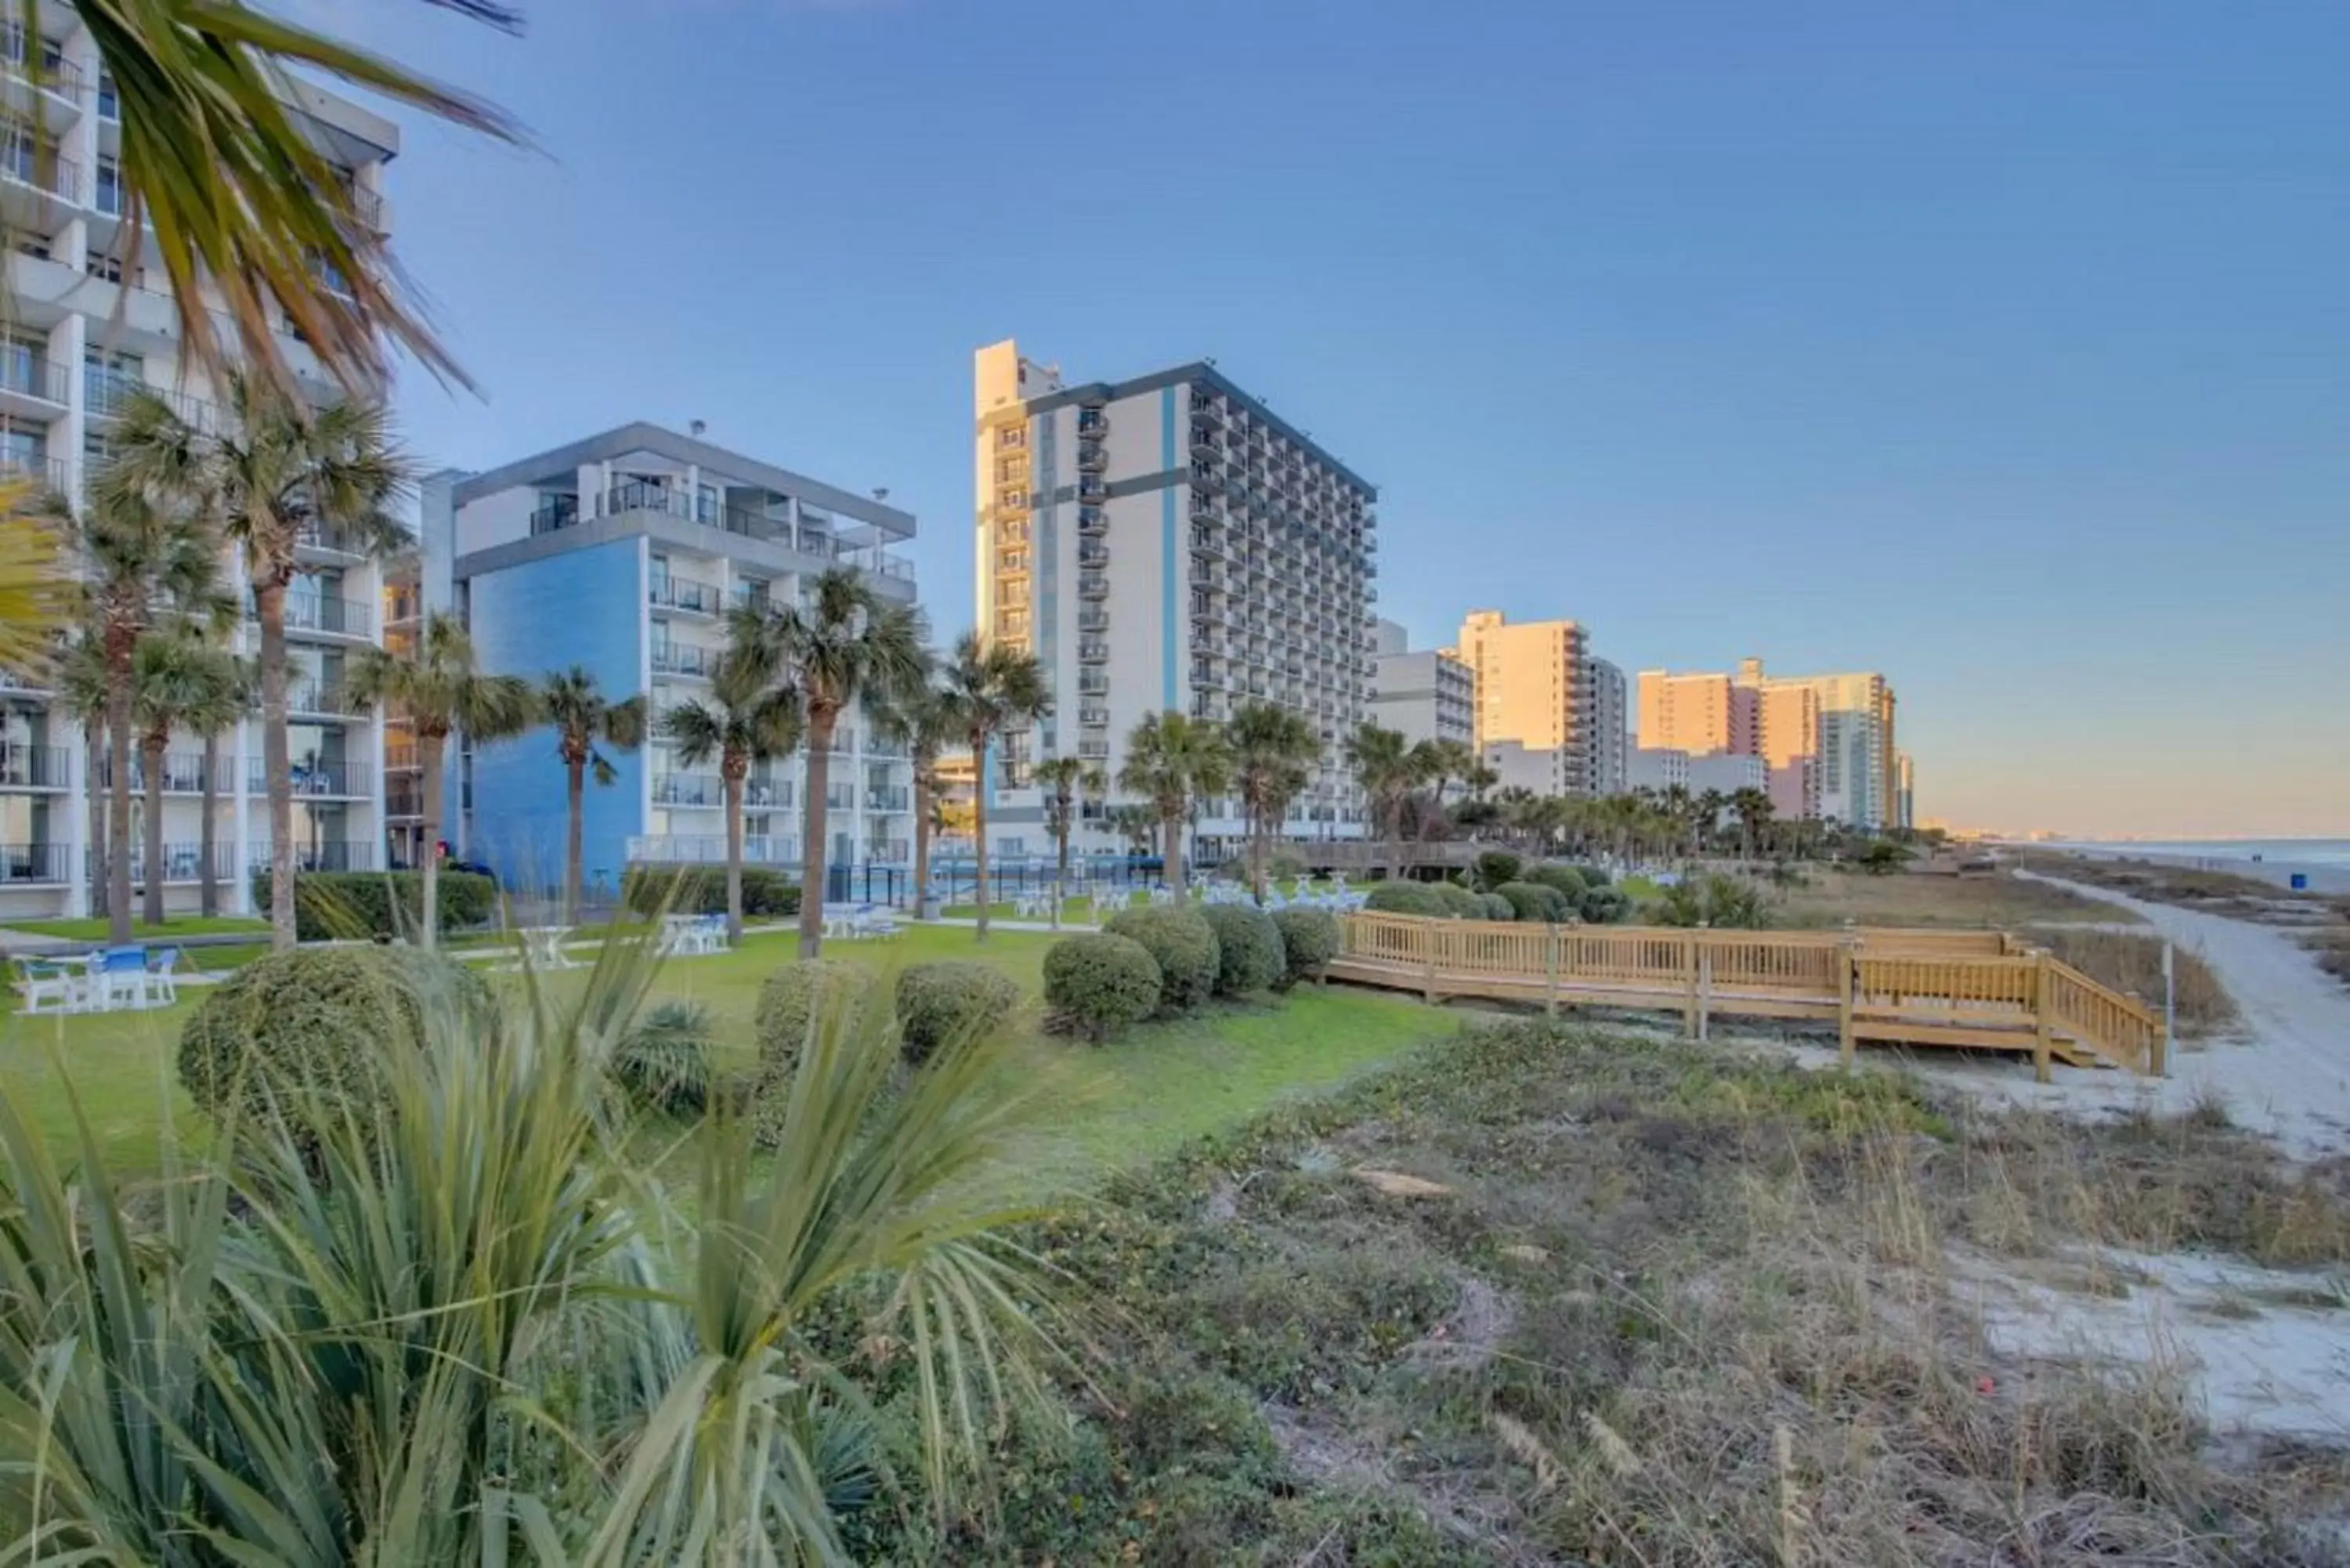 Area and facilities, Property Building in Oceanfront Paradise in the Heart of Myrtle Beach